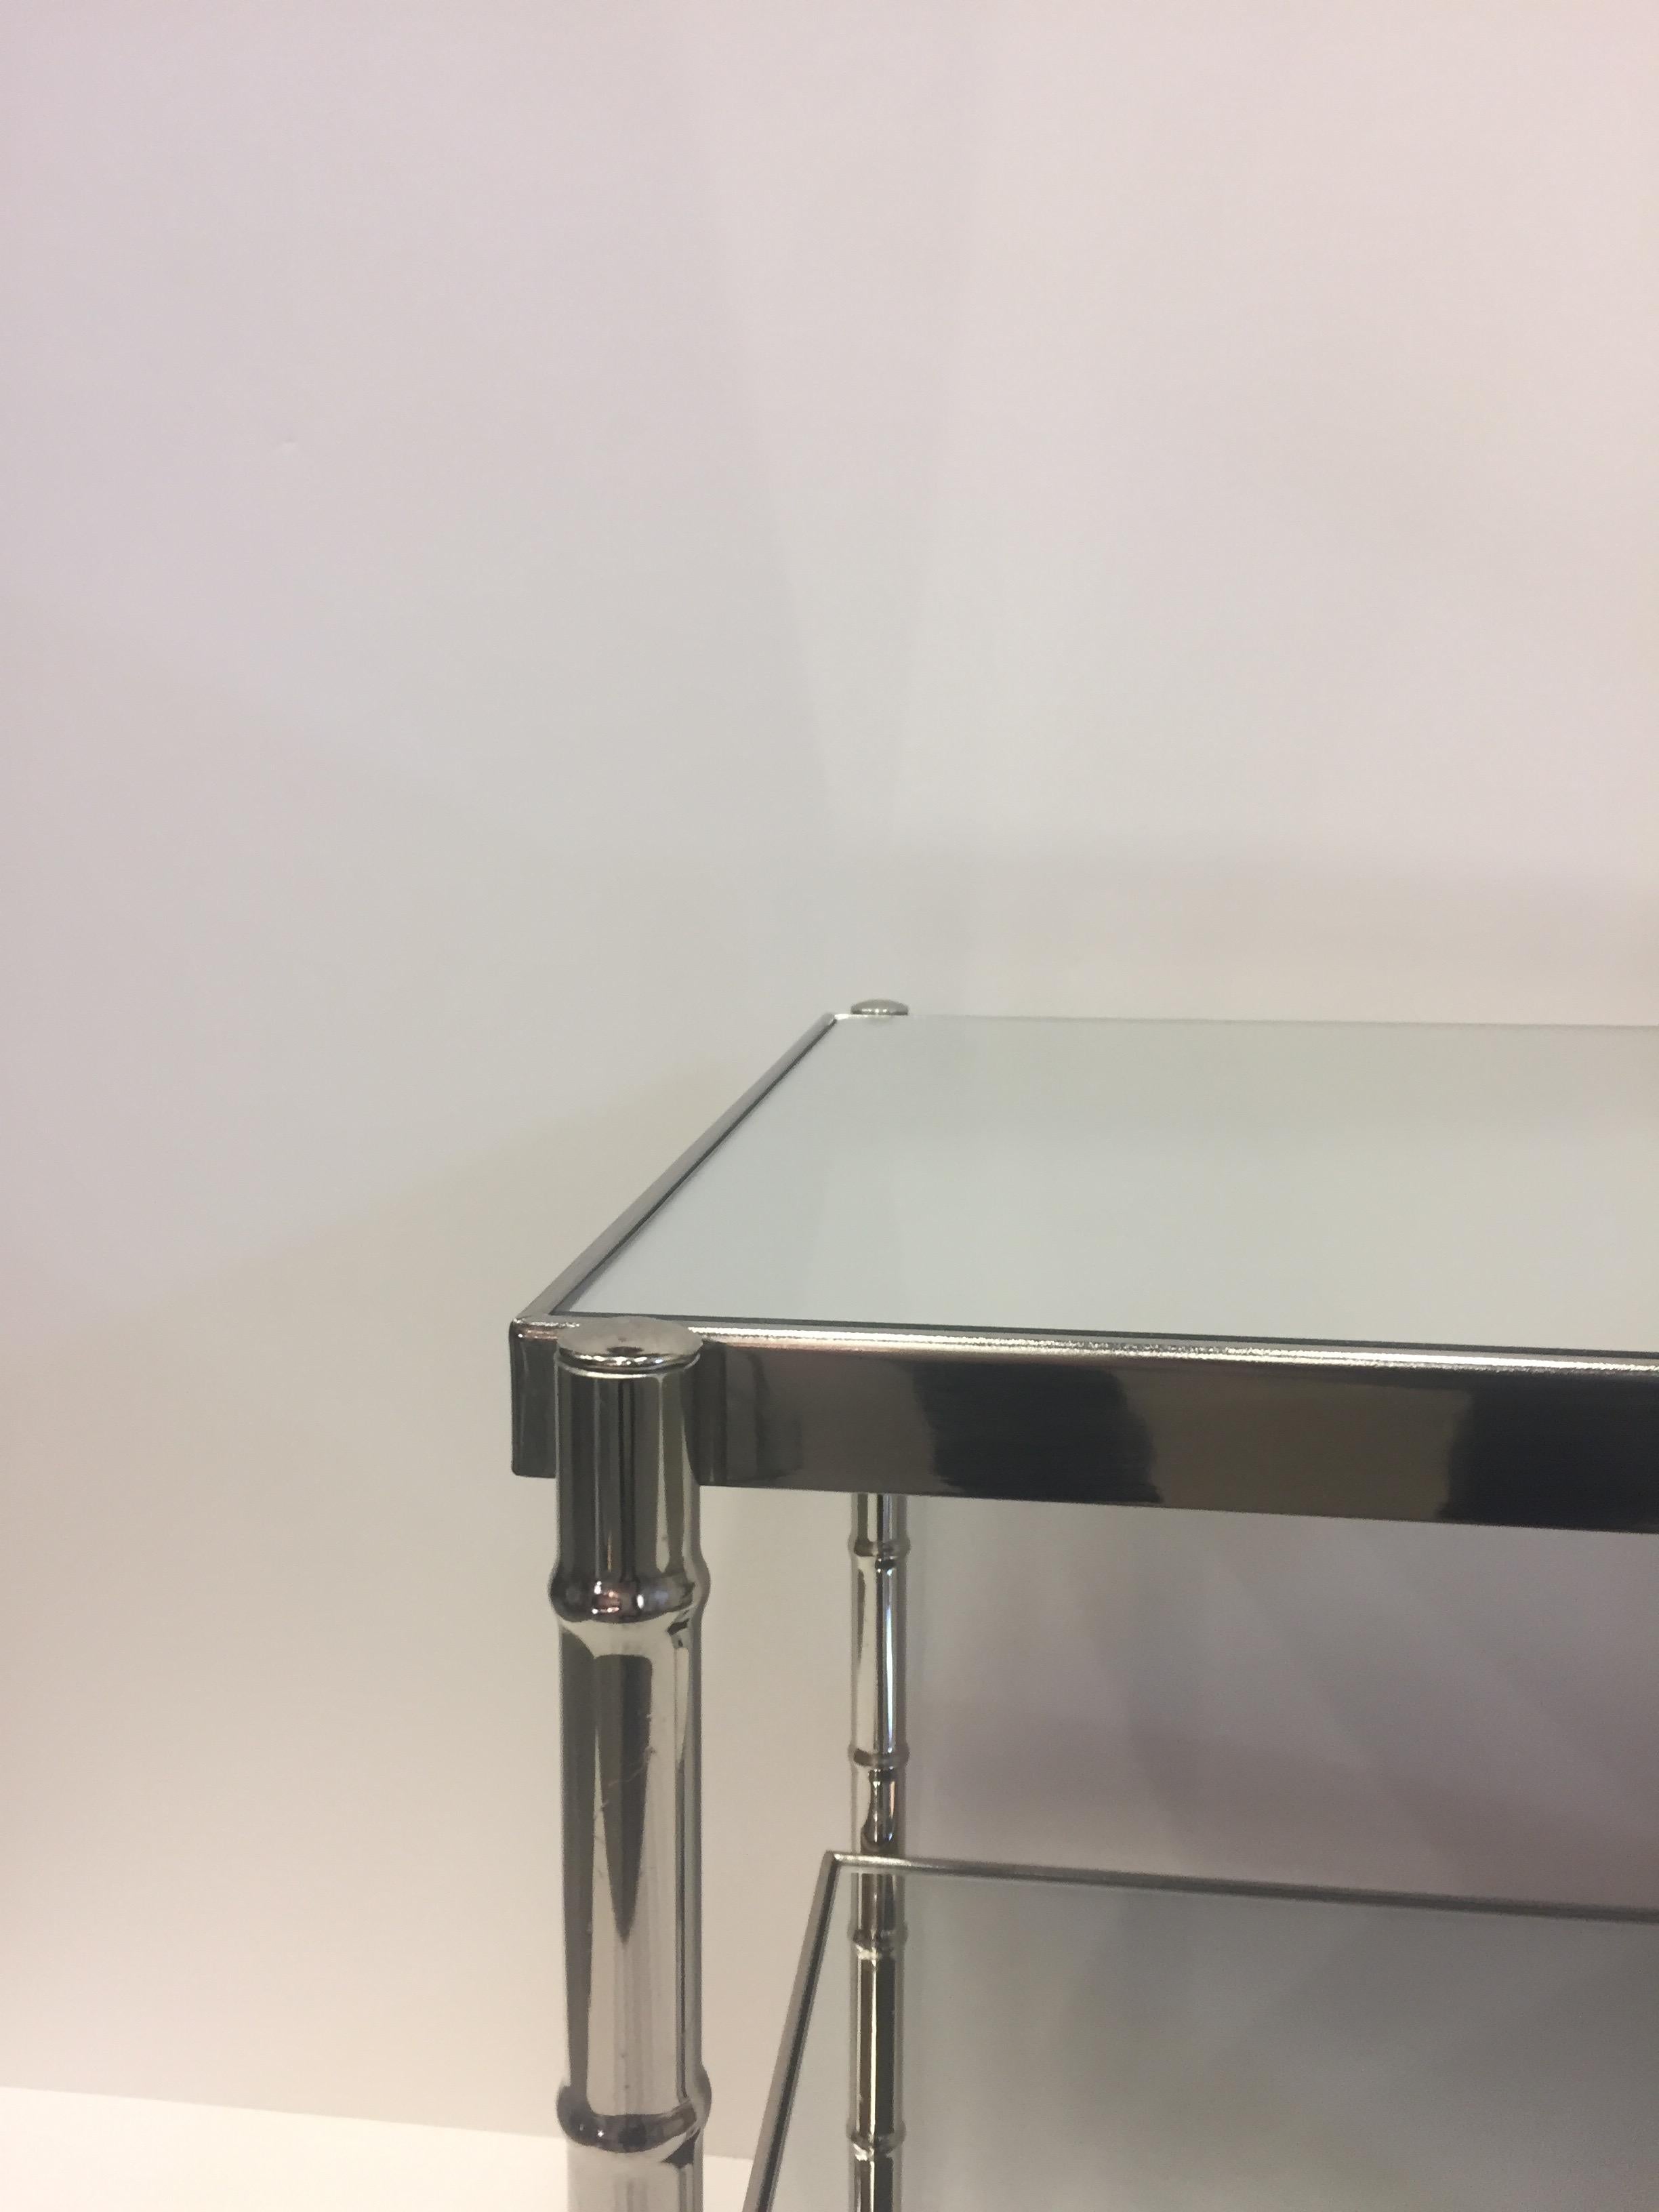 Quality end table having two tiers of mirror and stylish faux bamboo chrome structure.
 